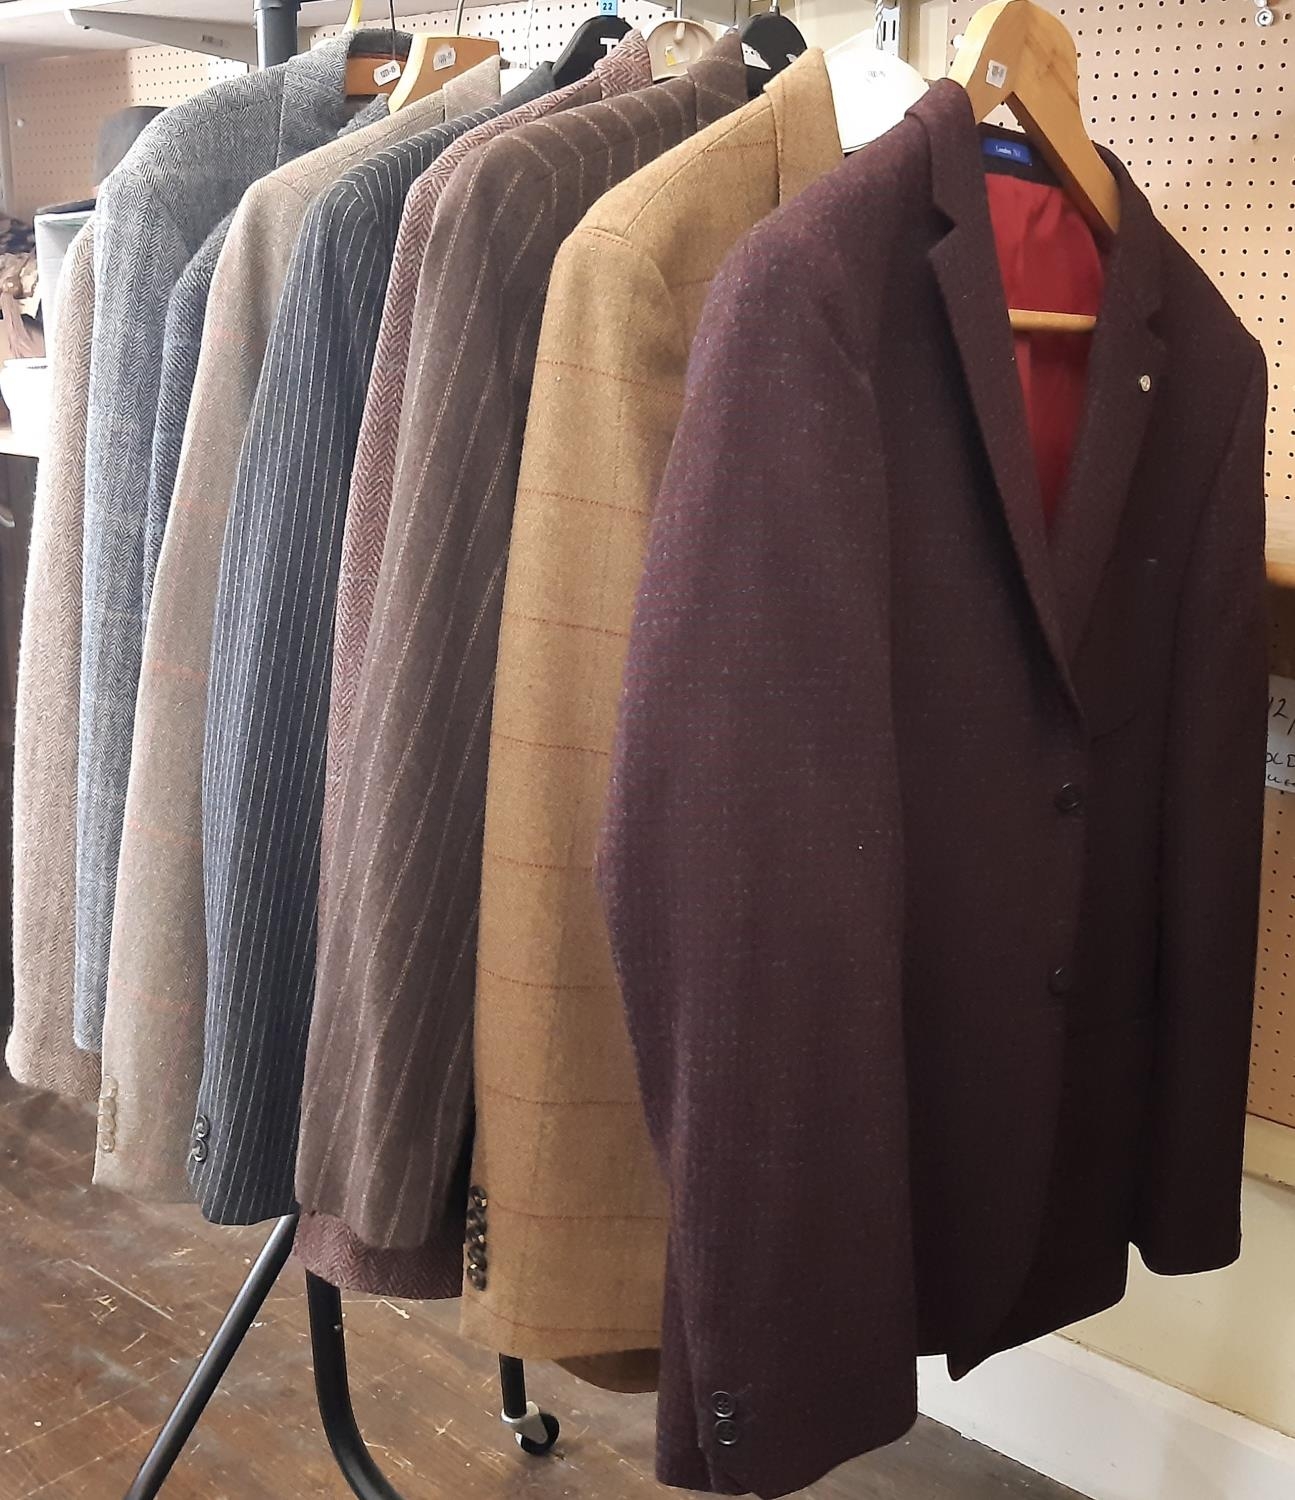 9 good quality men's tweed jackets, some like new with tags, brands include Jaeger, Peter Werth,